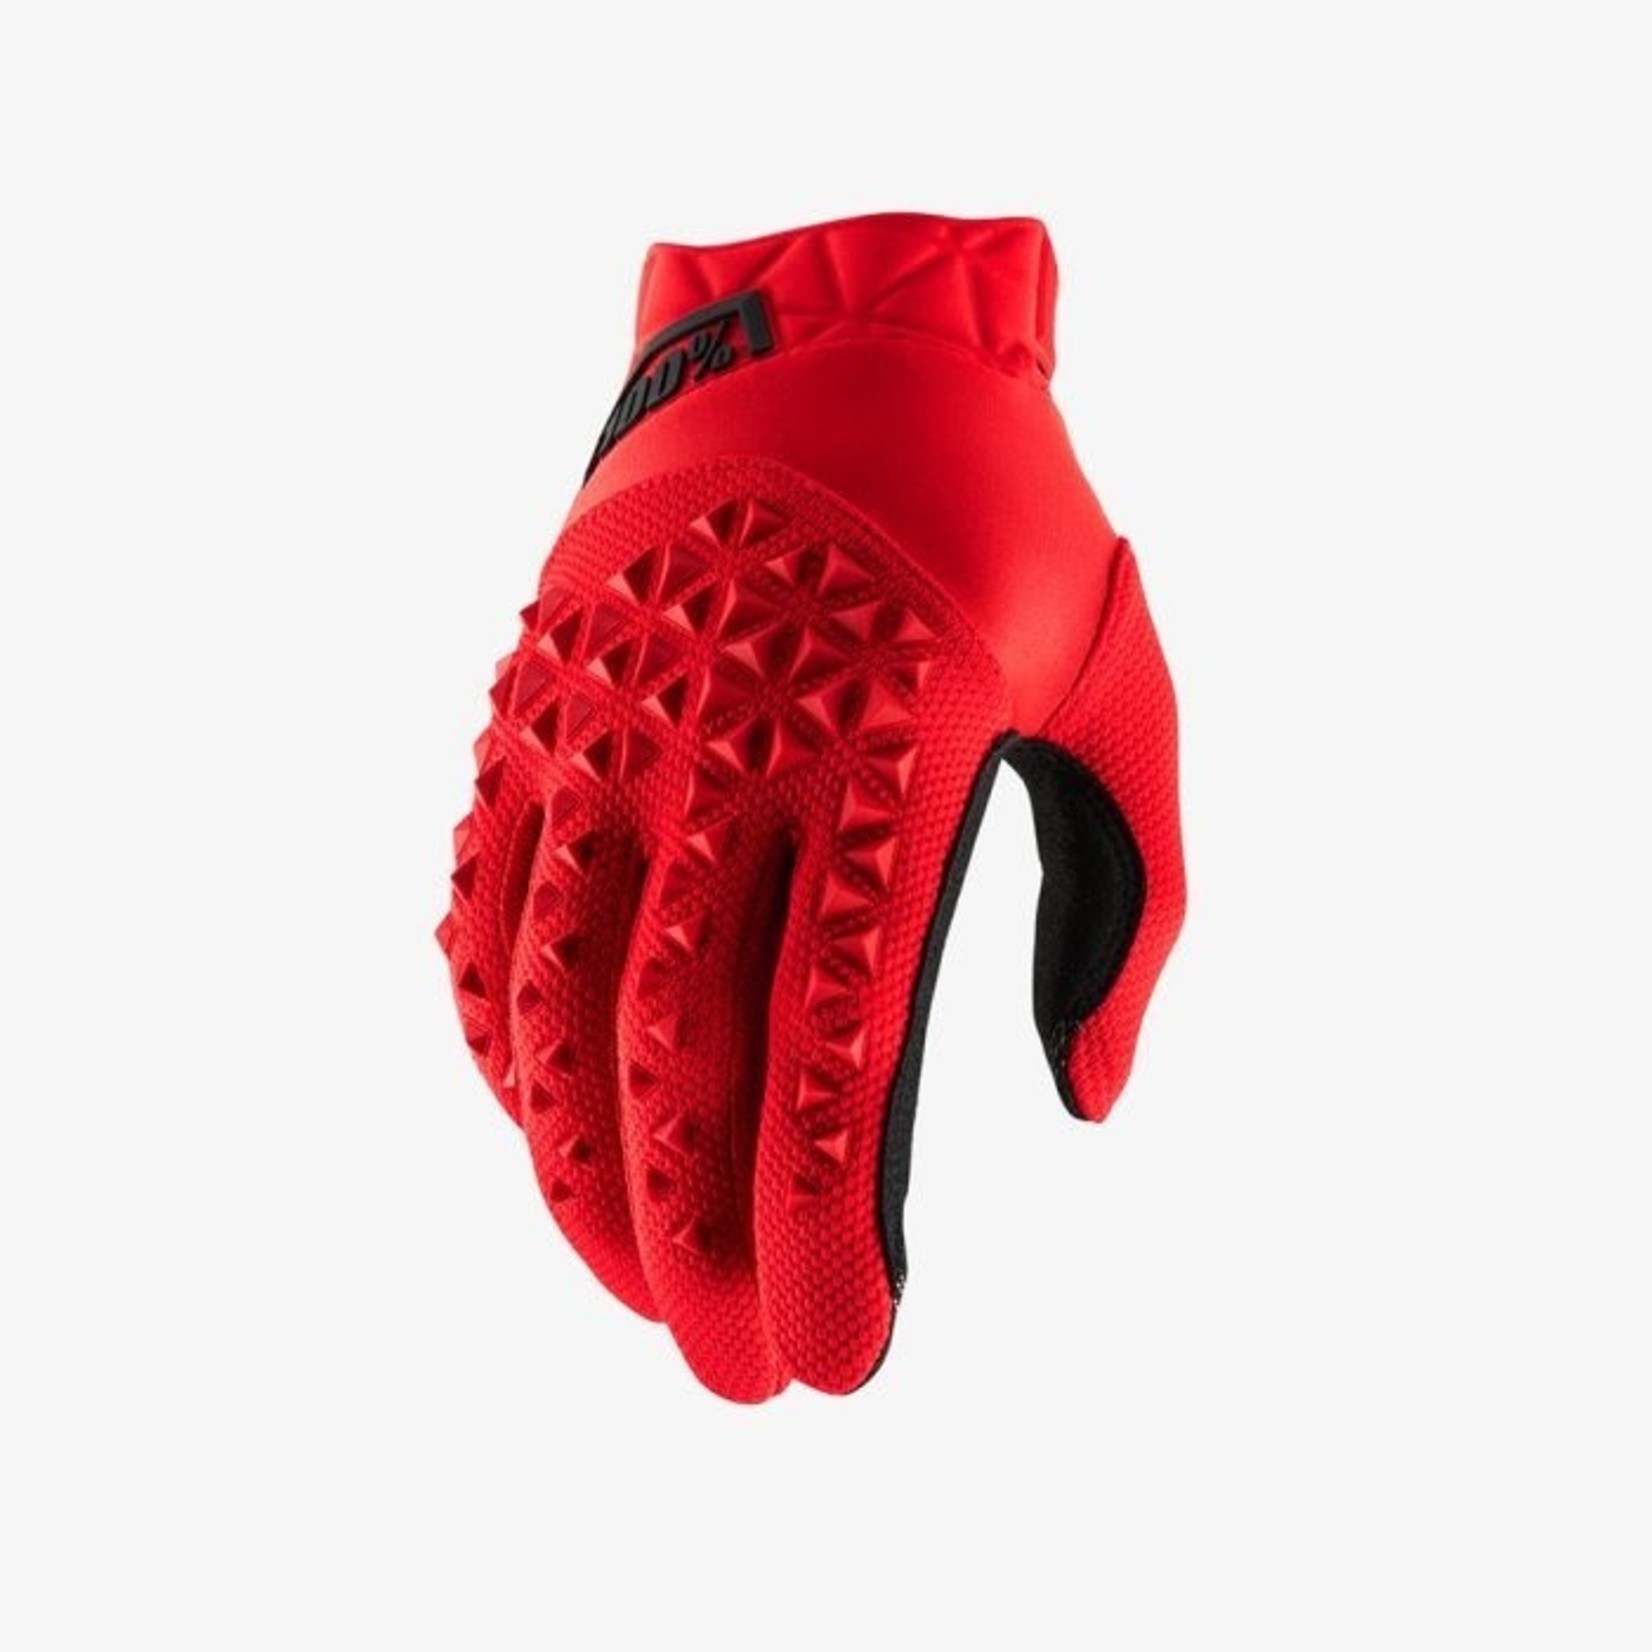 FE sports 100% AIRMATIC Youth Glove - Red/Black